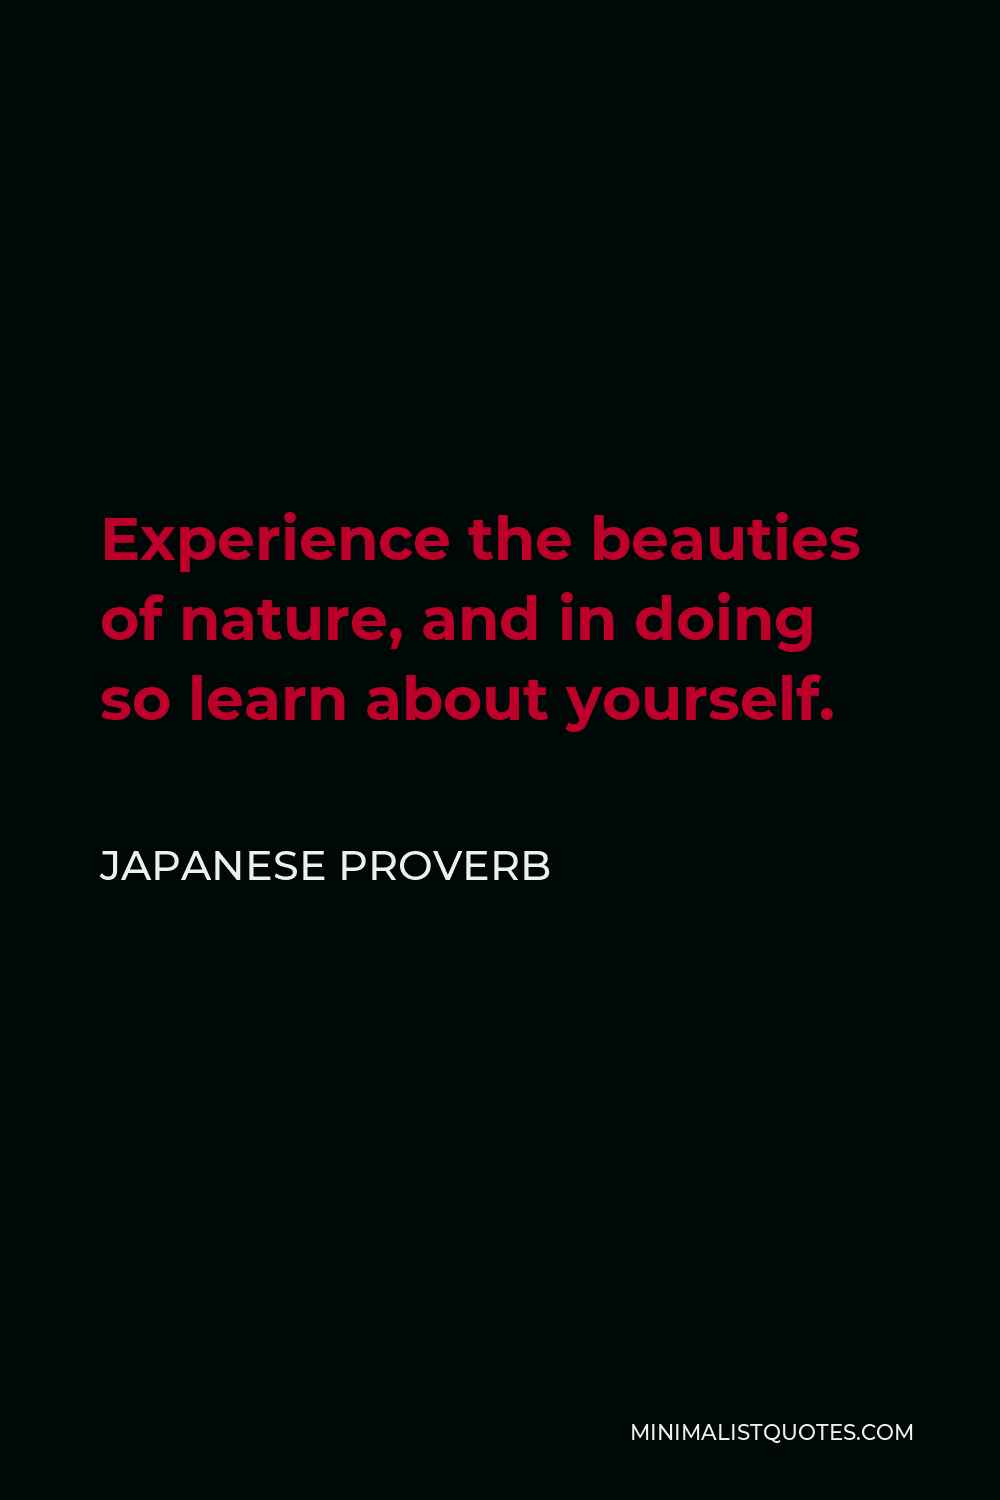 Japanese Proverb Quote - Experience the beauties of nature, and in doing so learn about yourself.